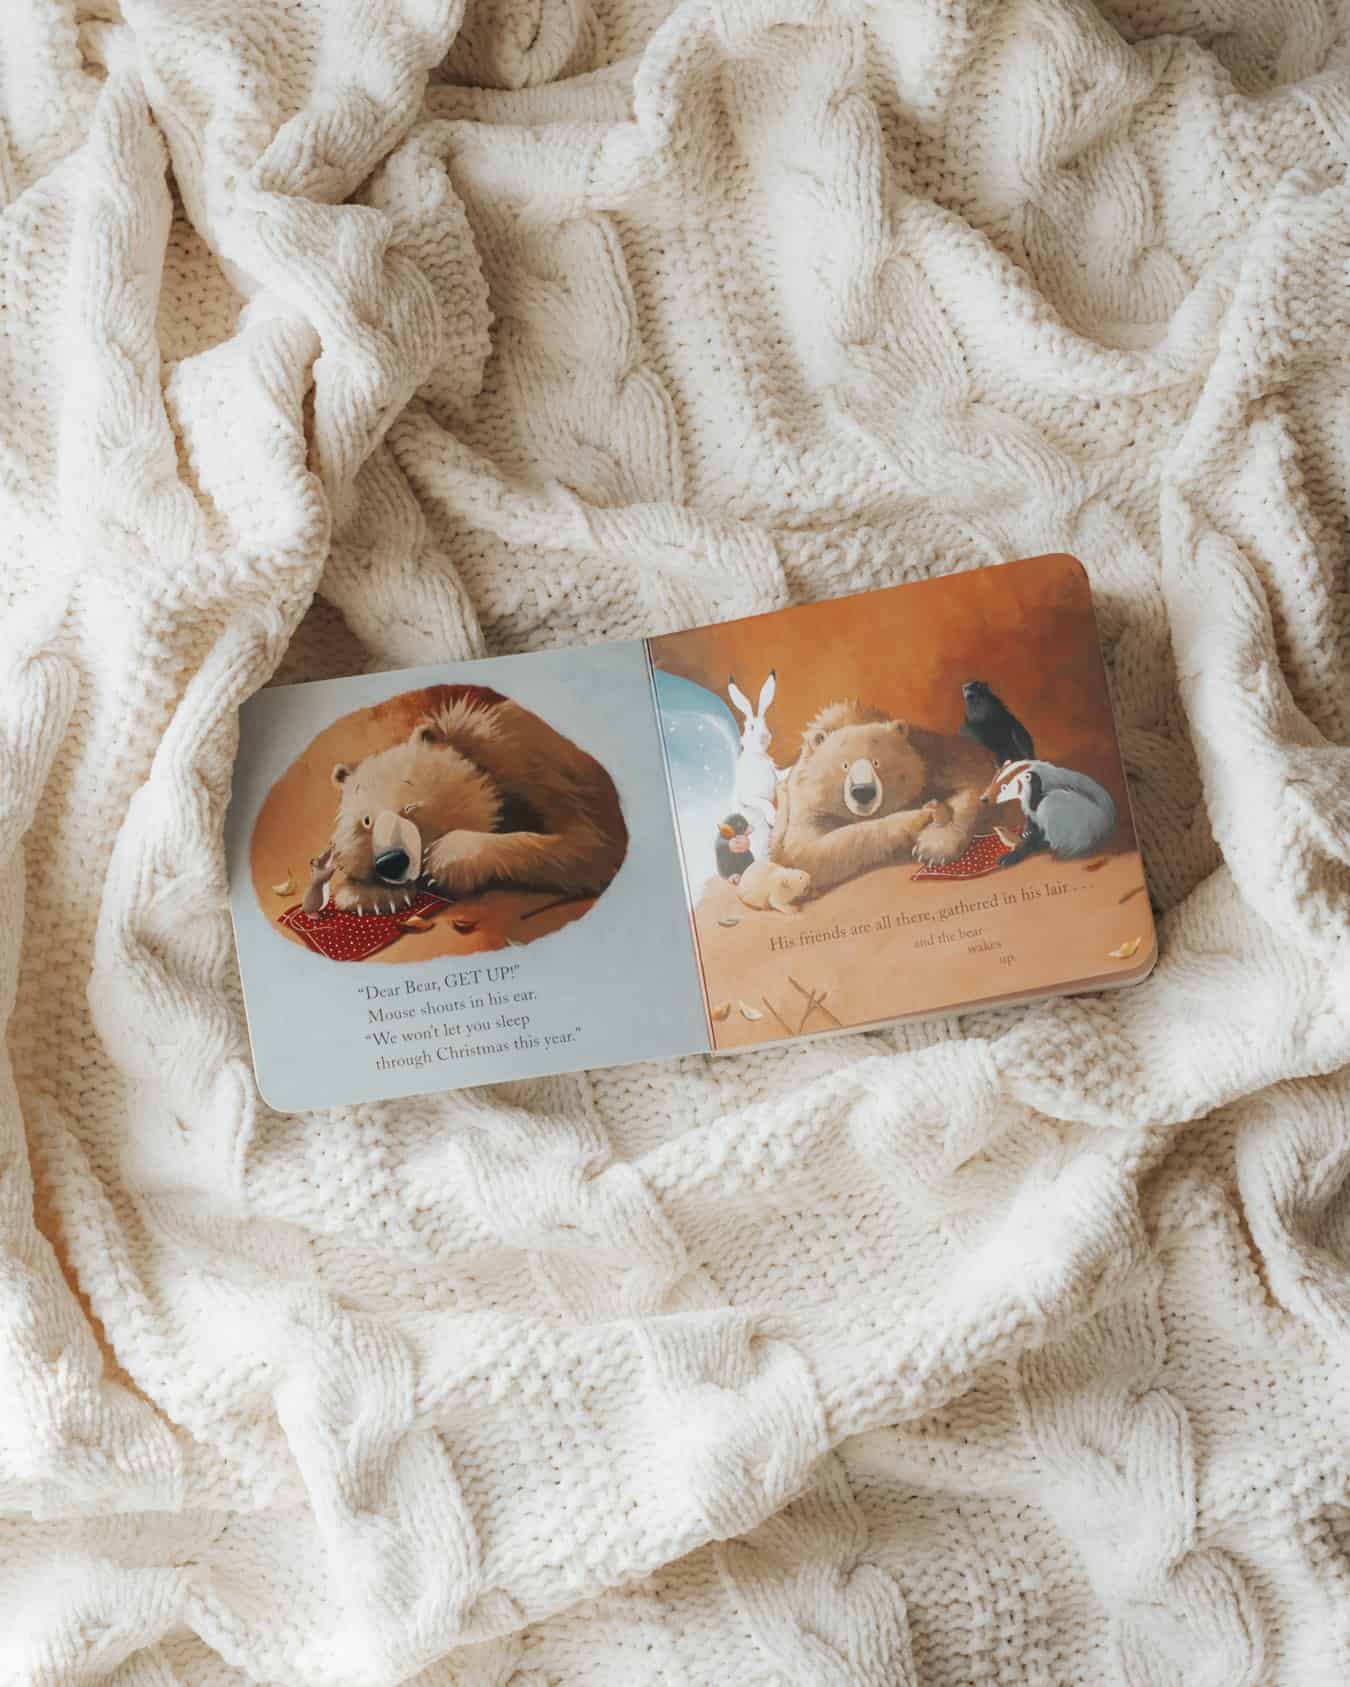 A toddler's board book on a cream-colored blanket.